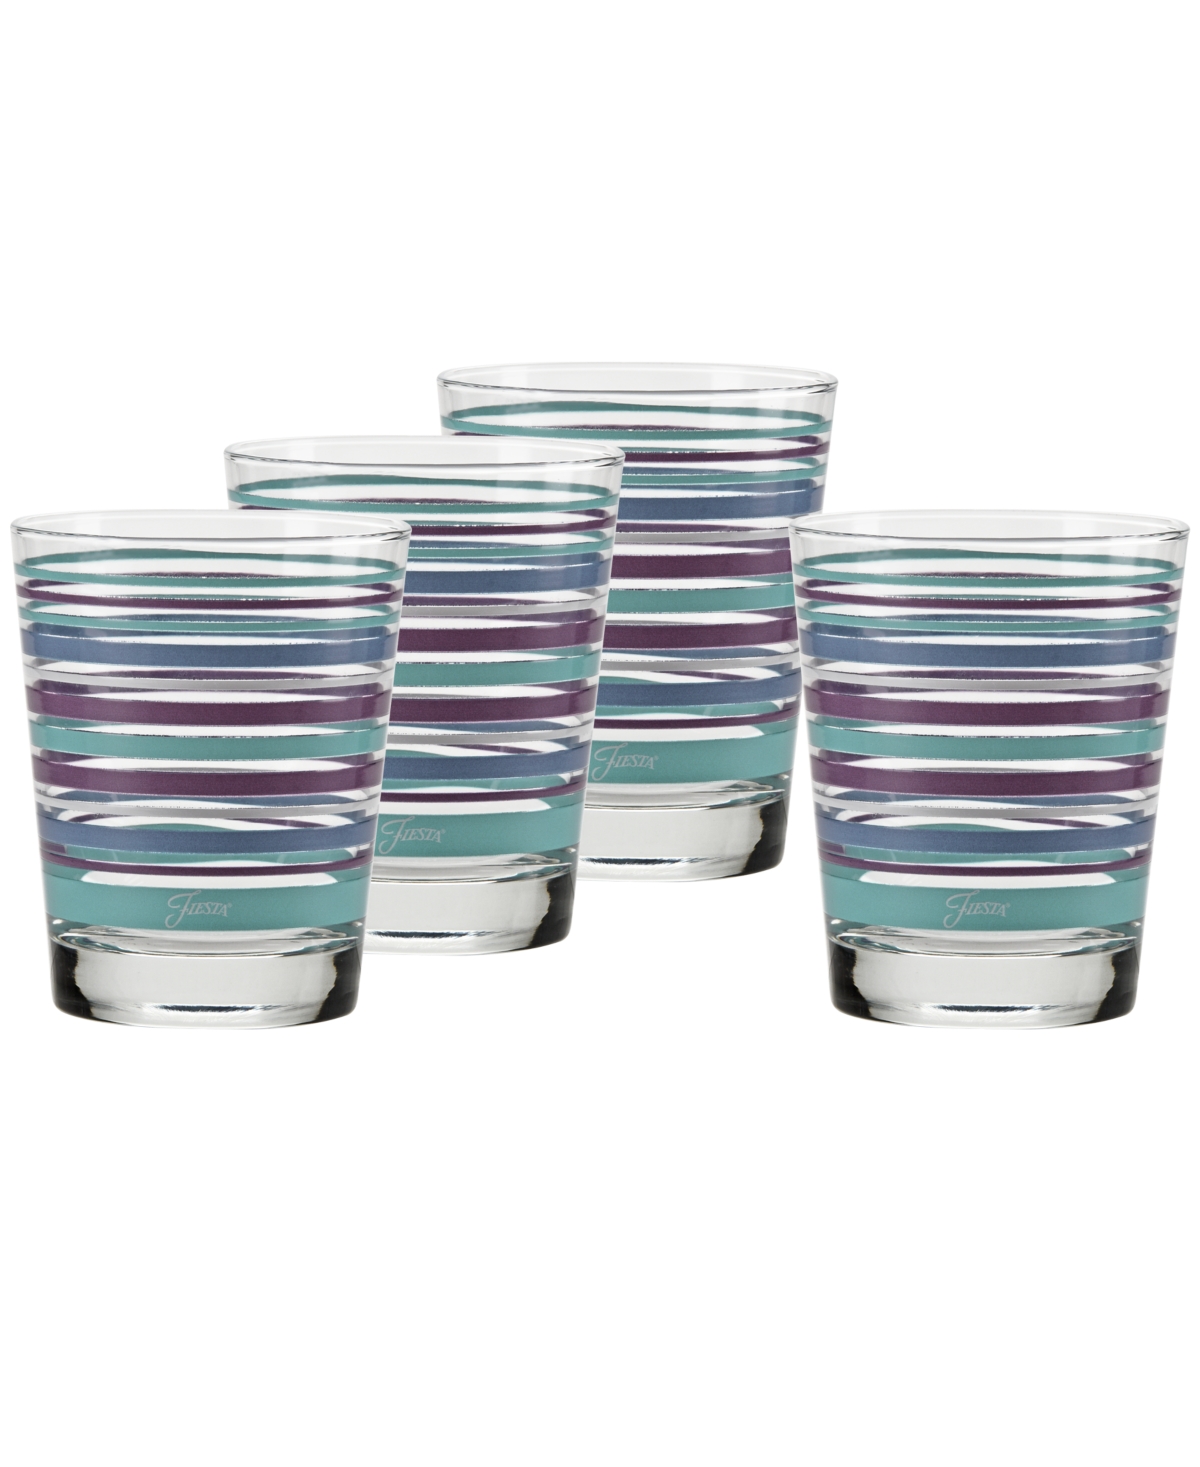 Fiesta Coastal Stripes 15-ounce Tapered Double Old Fashioned (dof) Glass, Set Of 4 In Turquoise,lapis,mulberry And White